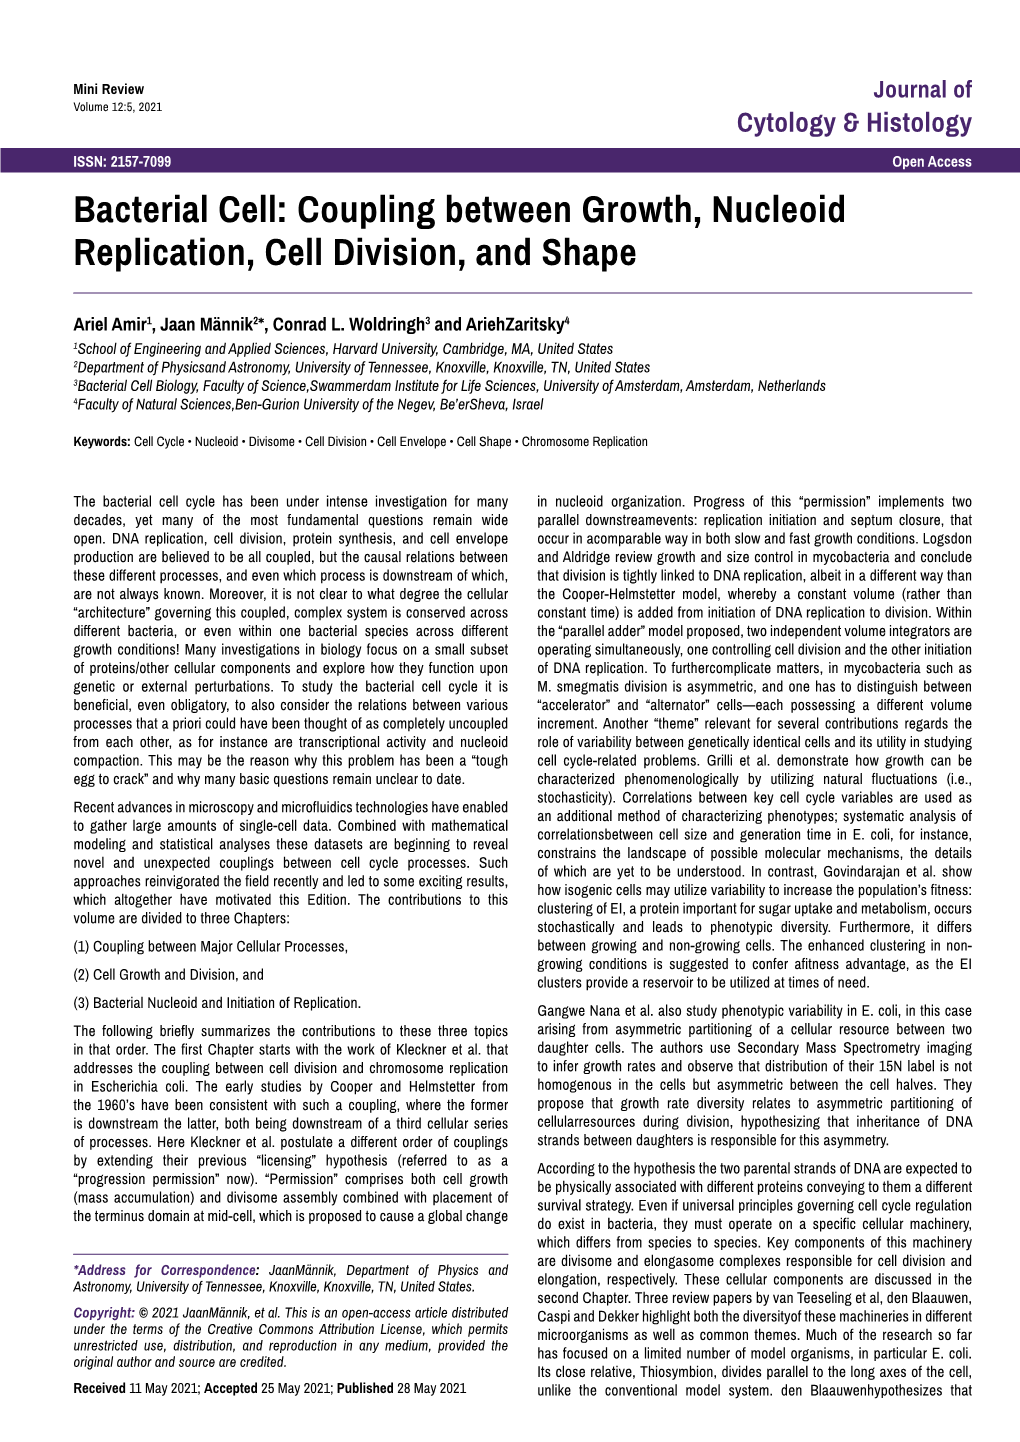 Bacterial Cell: Coupling Between Growth, Nucleoid Replication, Cell Division, and Shape